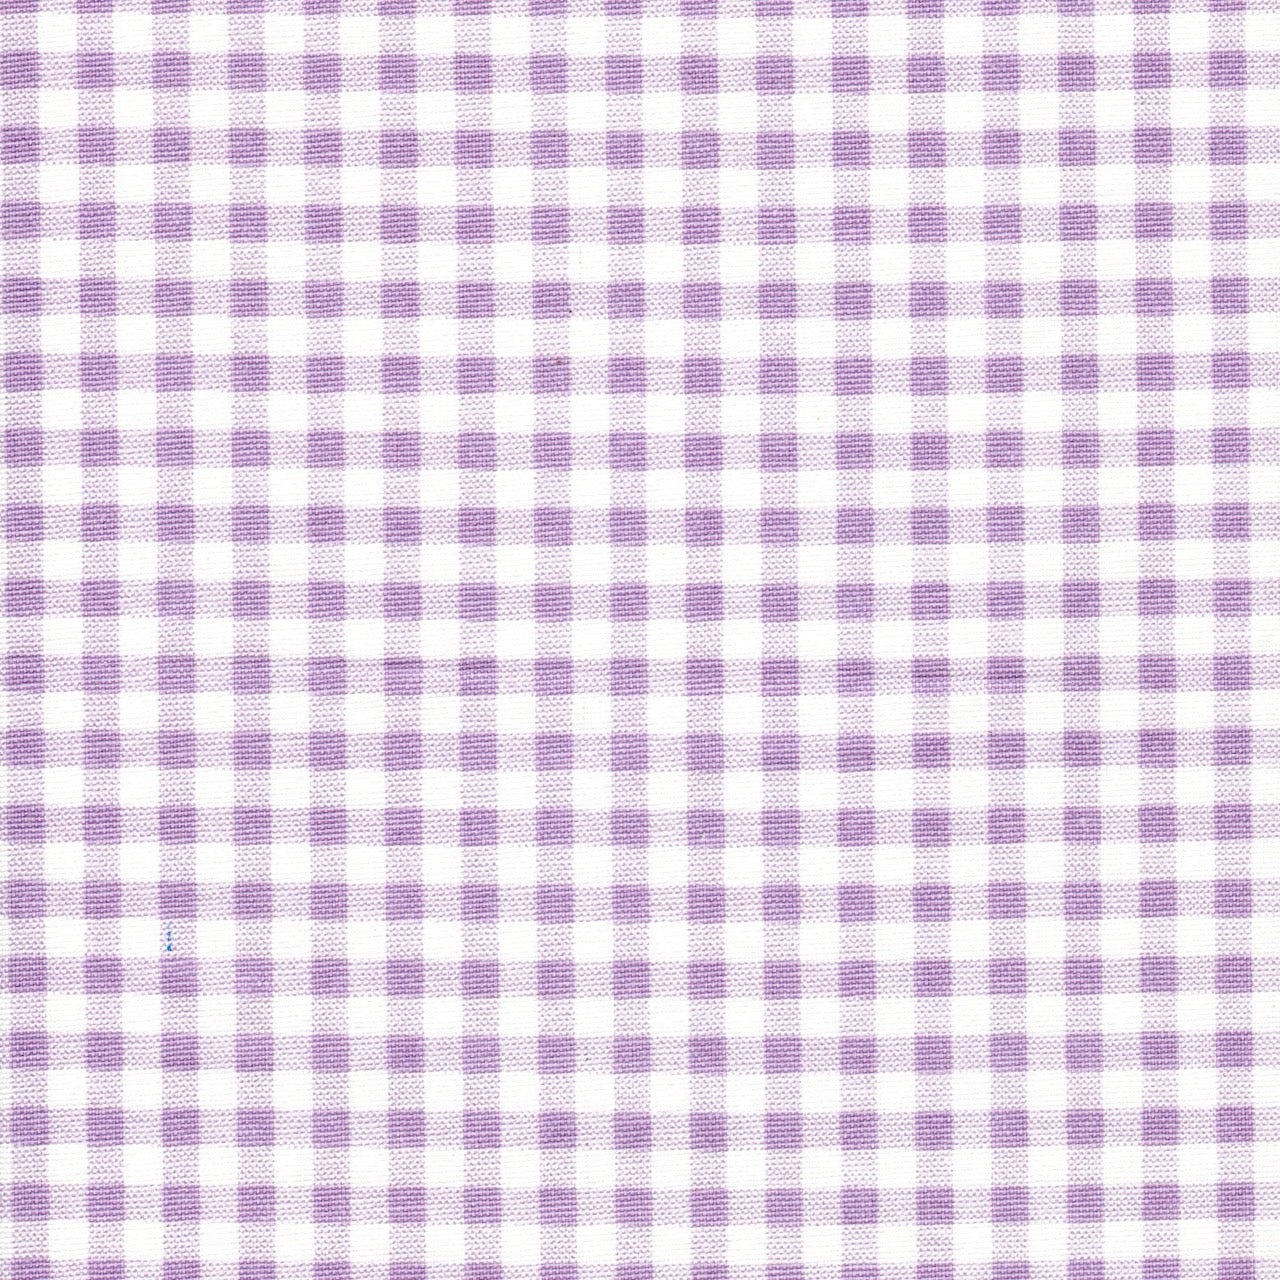 Decorative Pillows in Orchid Large Gingham Check on White